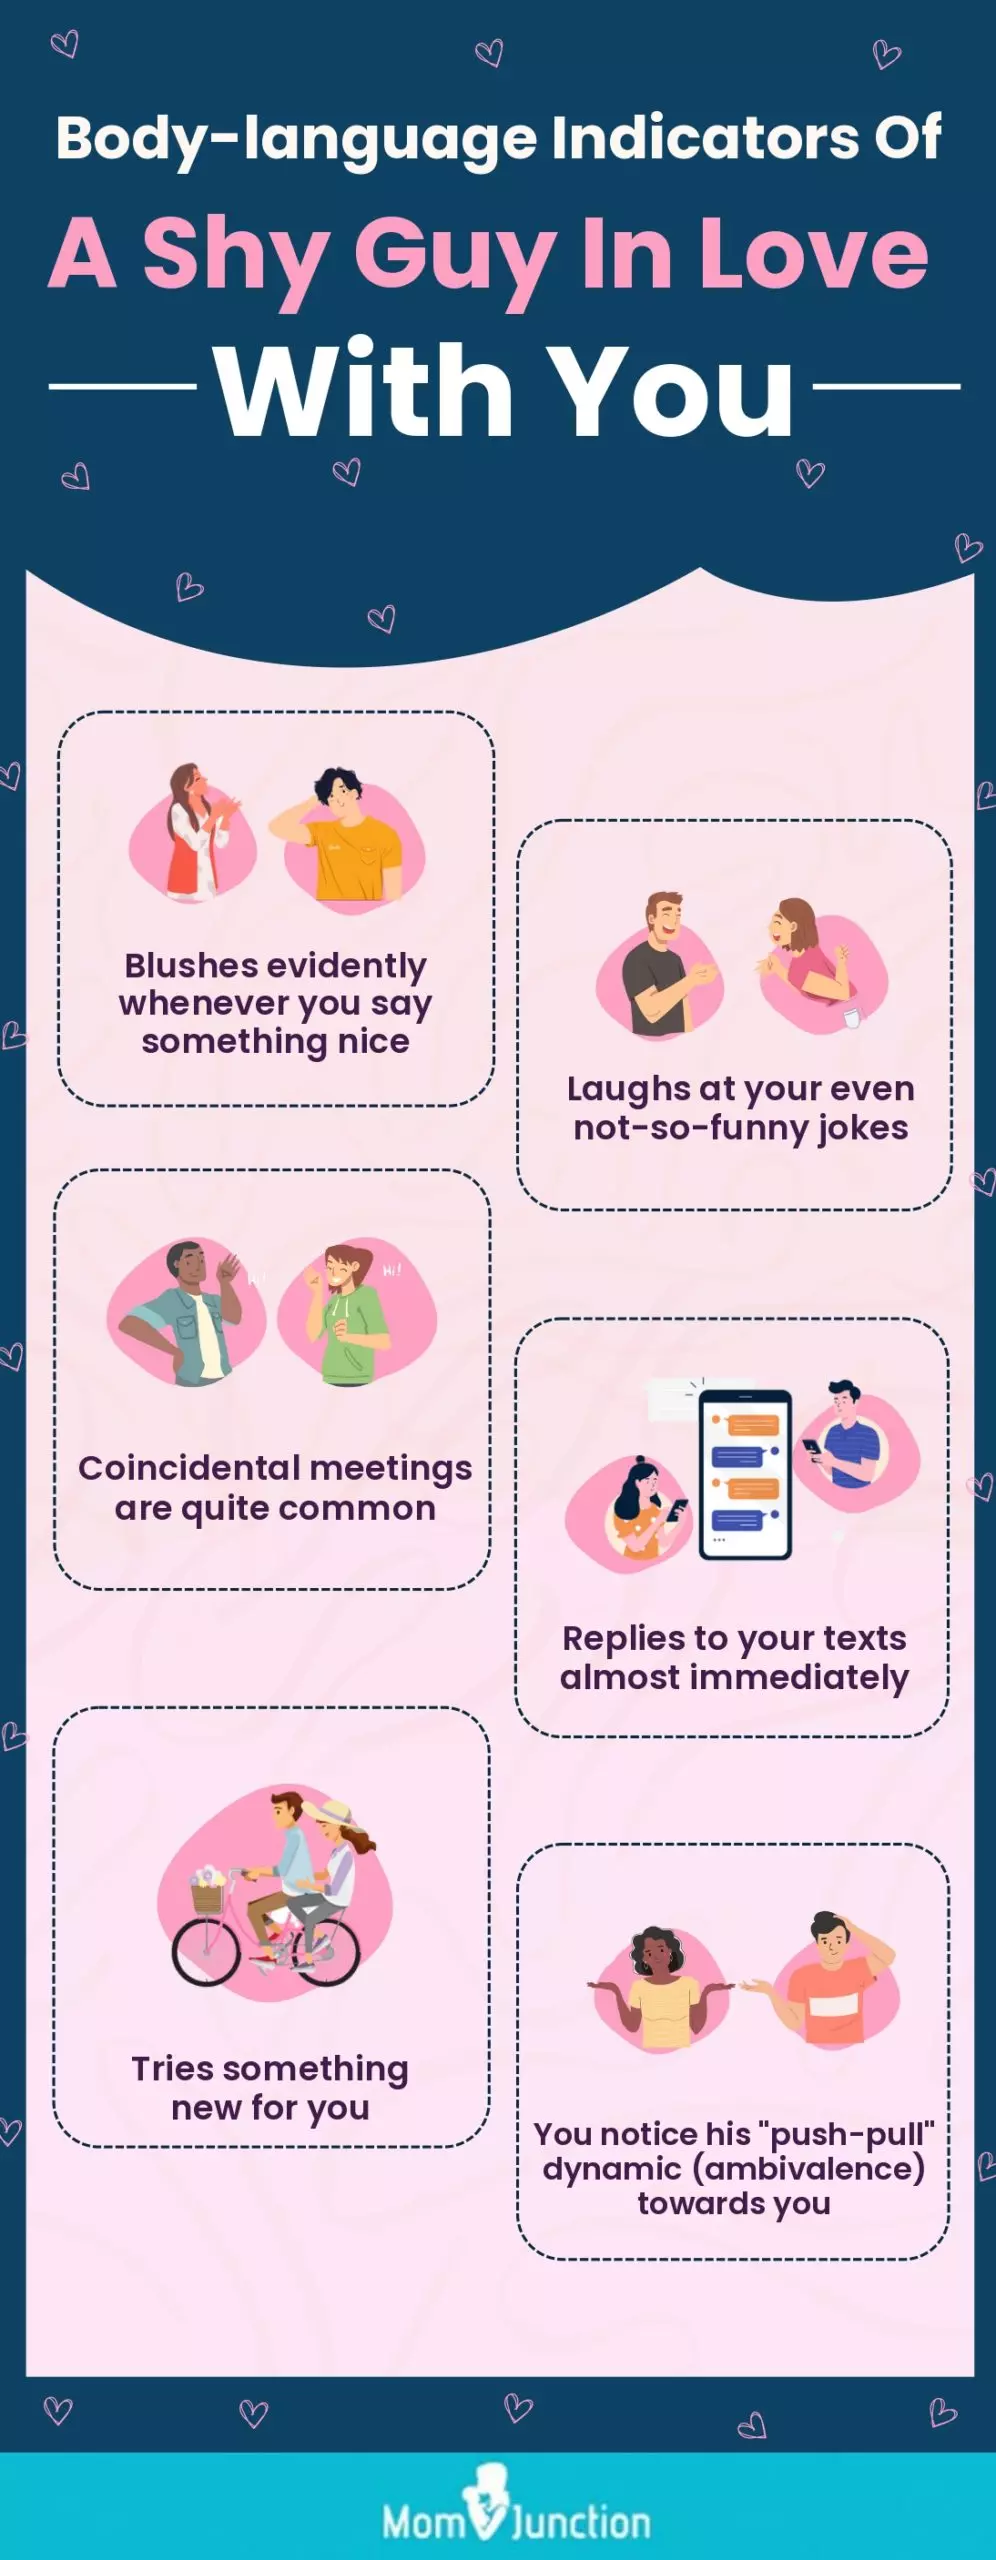 signs to tell you that a shy guy likes you (infographic)